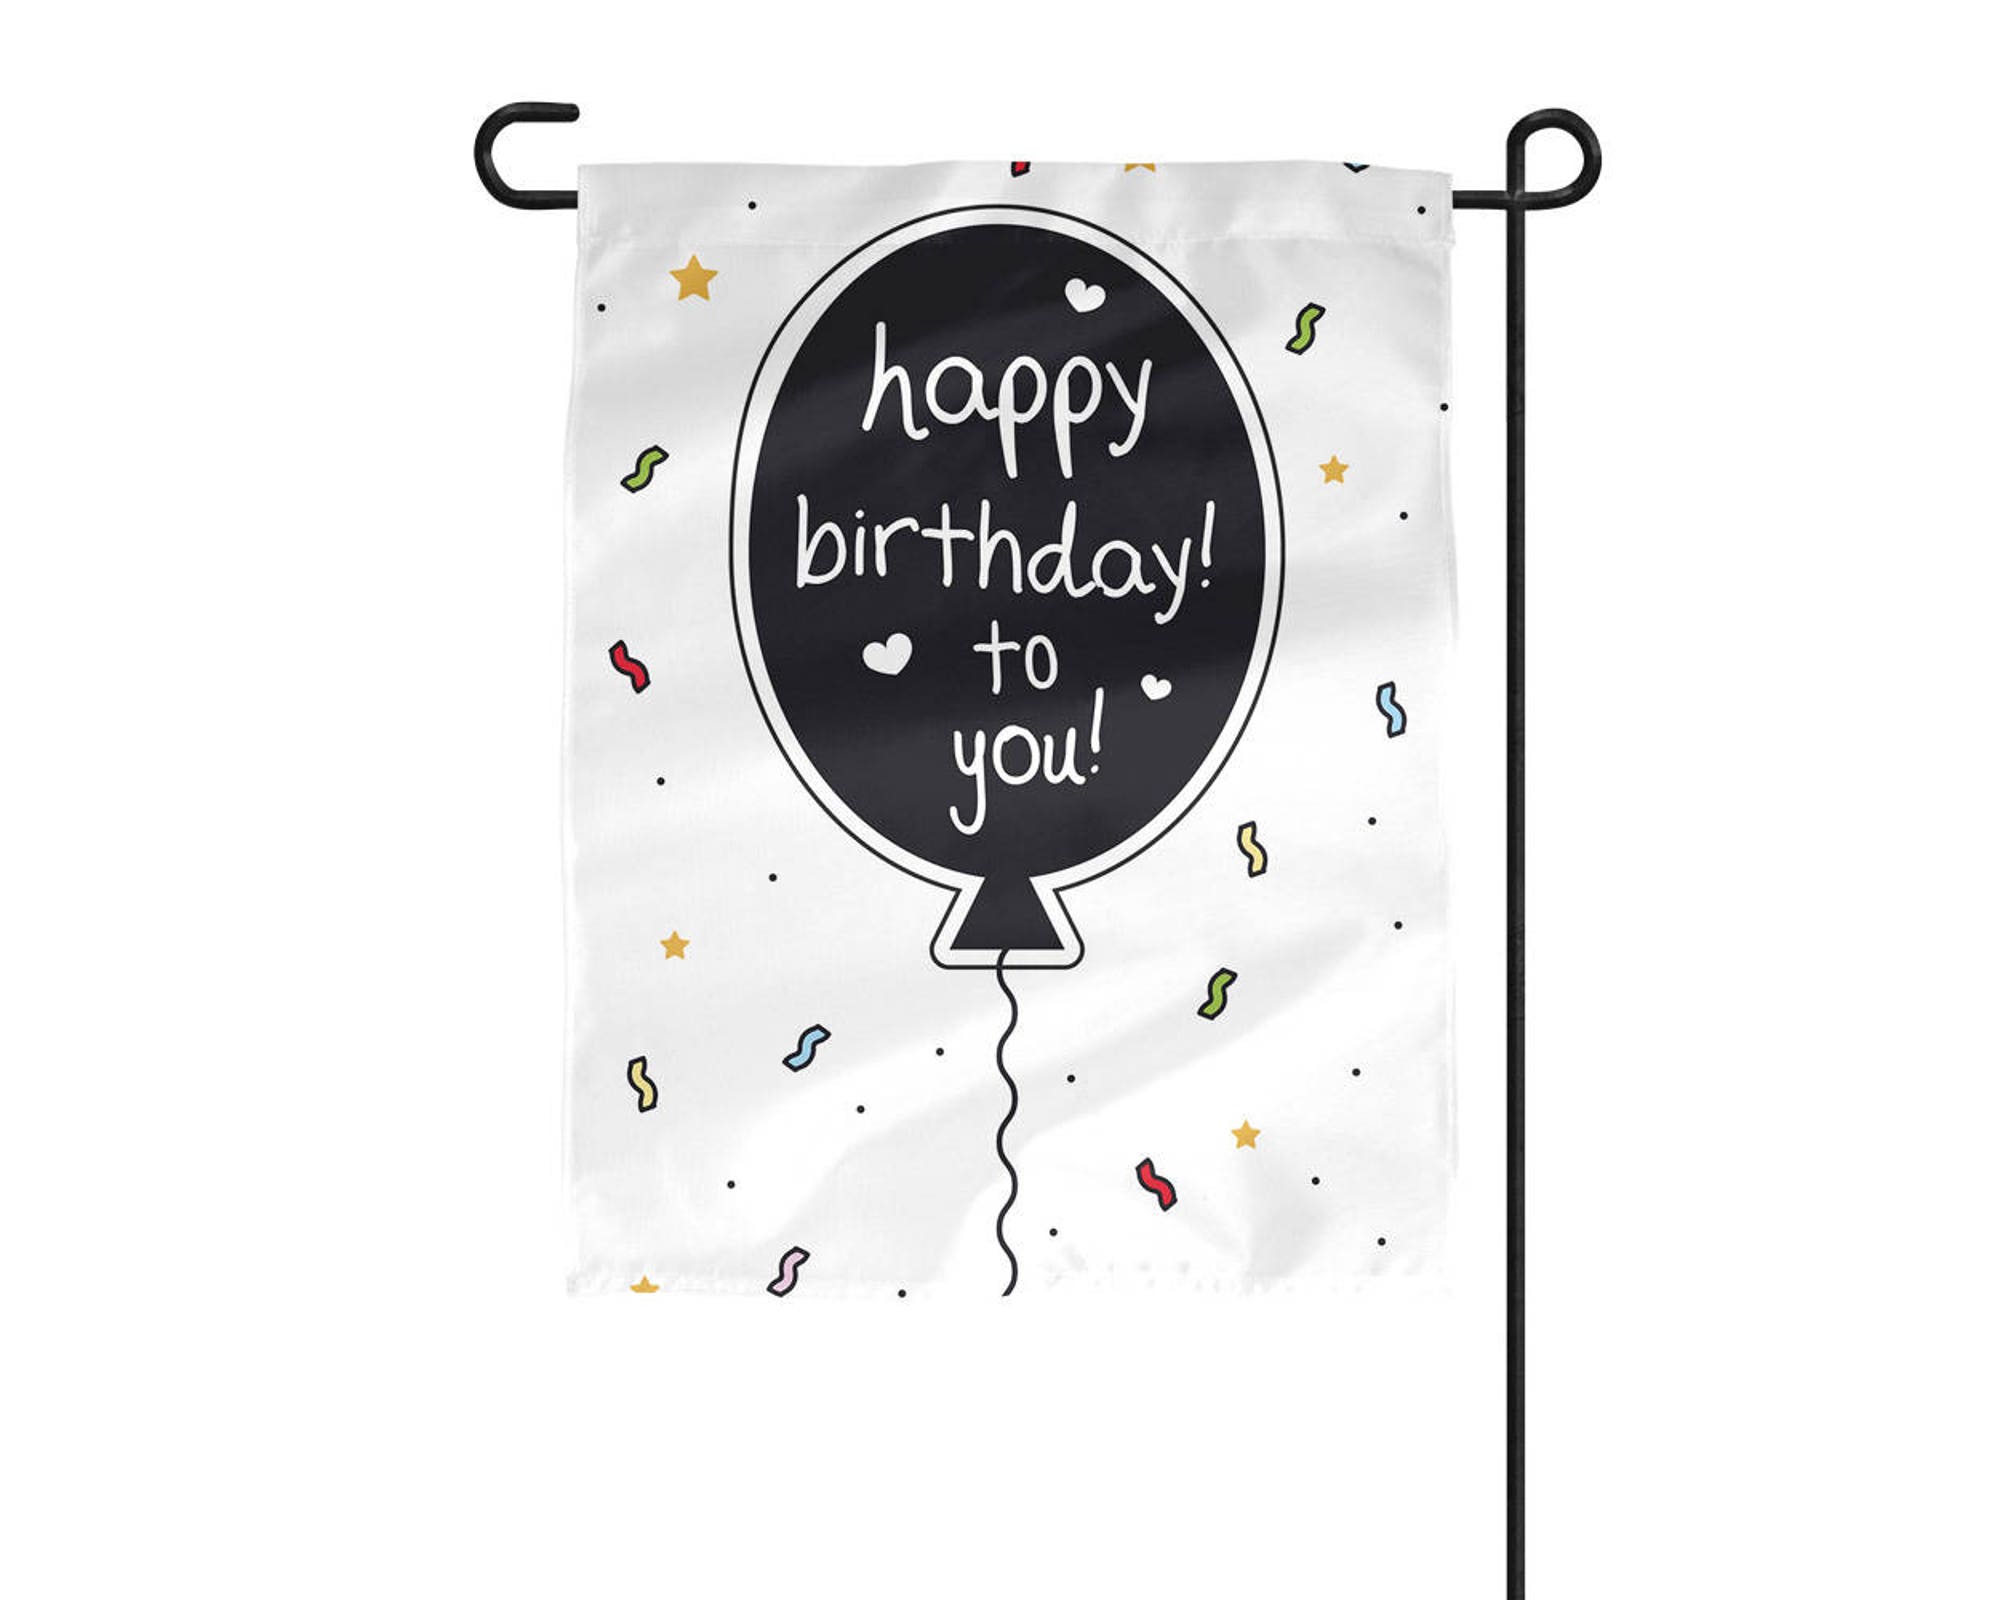 Discover Happy Birthday 12 Inches Wide x 18 Inches Tall Double-Sided Garden Flag 100% Polyester Outside (Birthday-4-01)